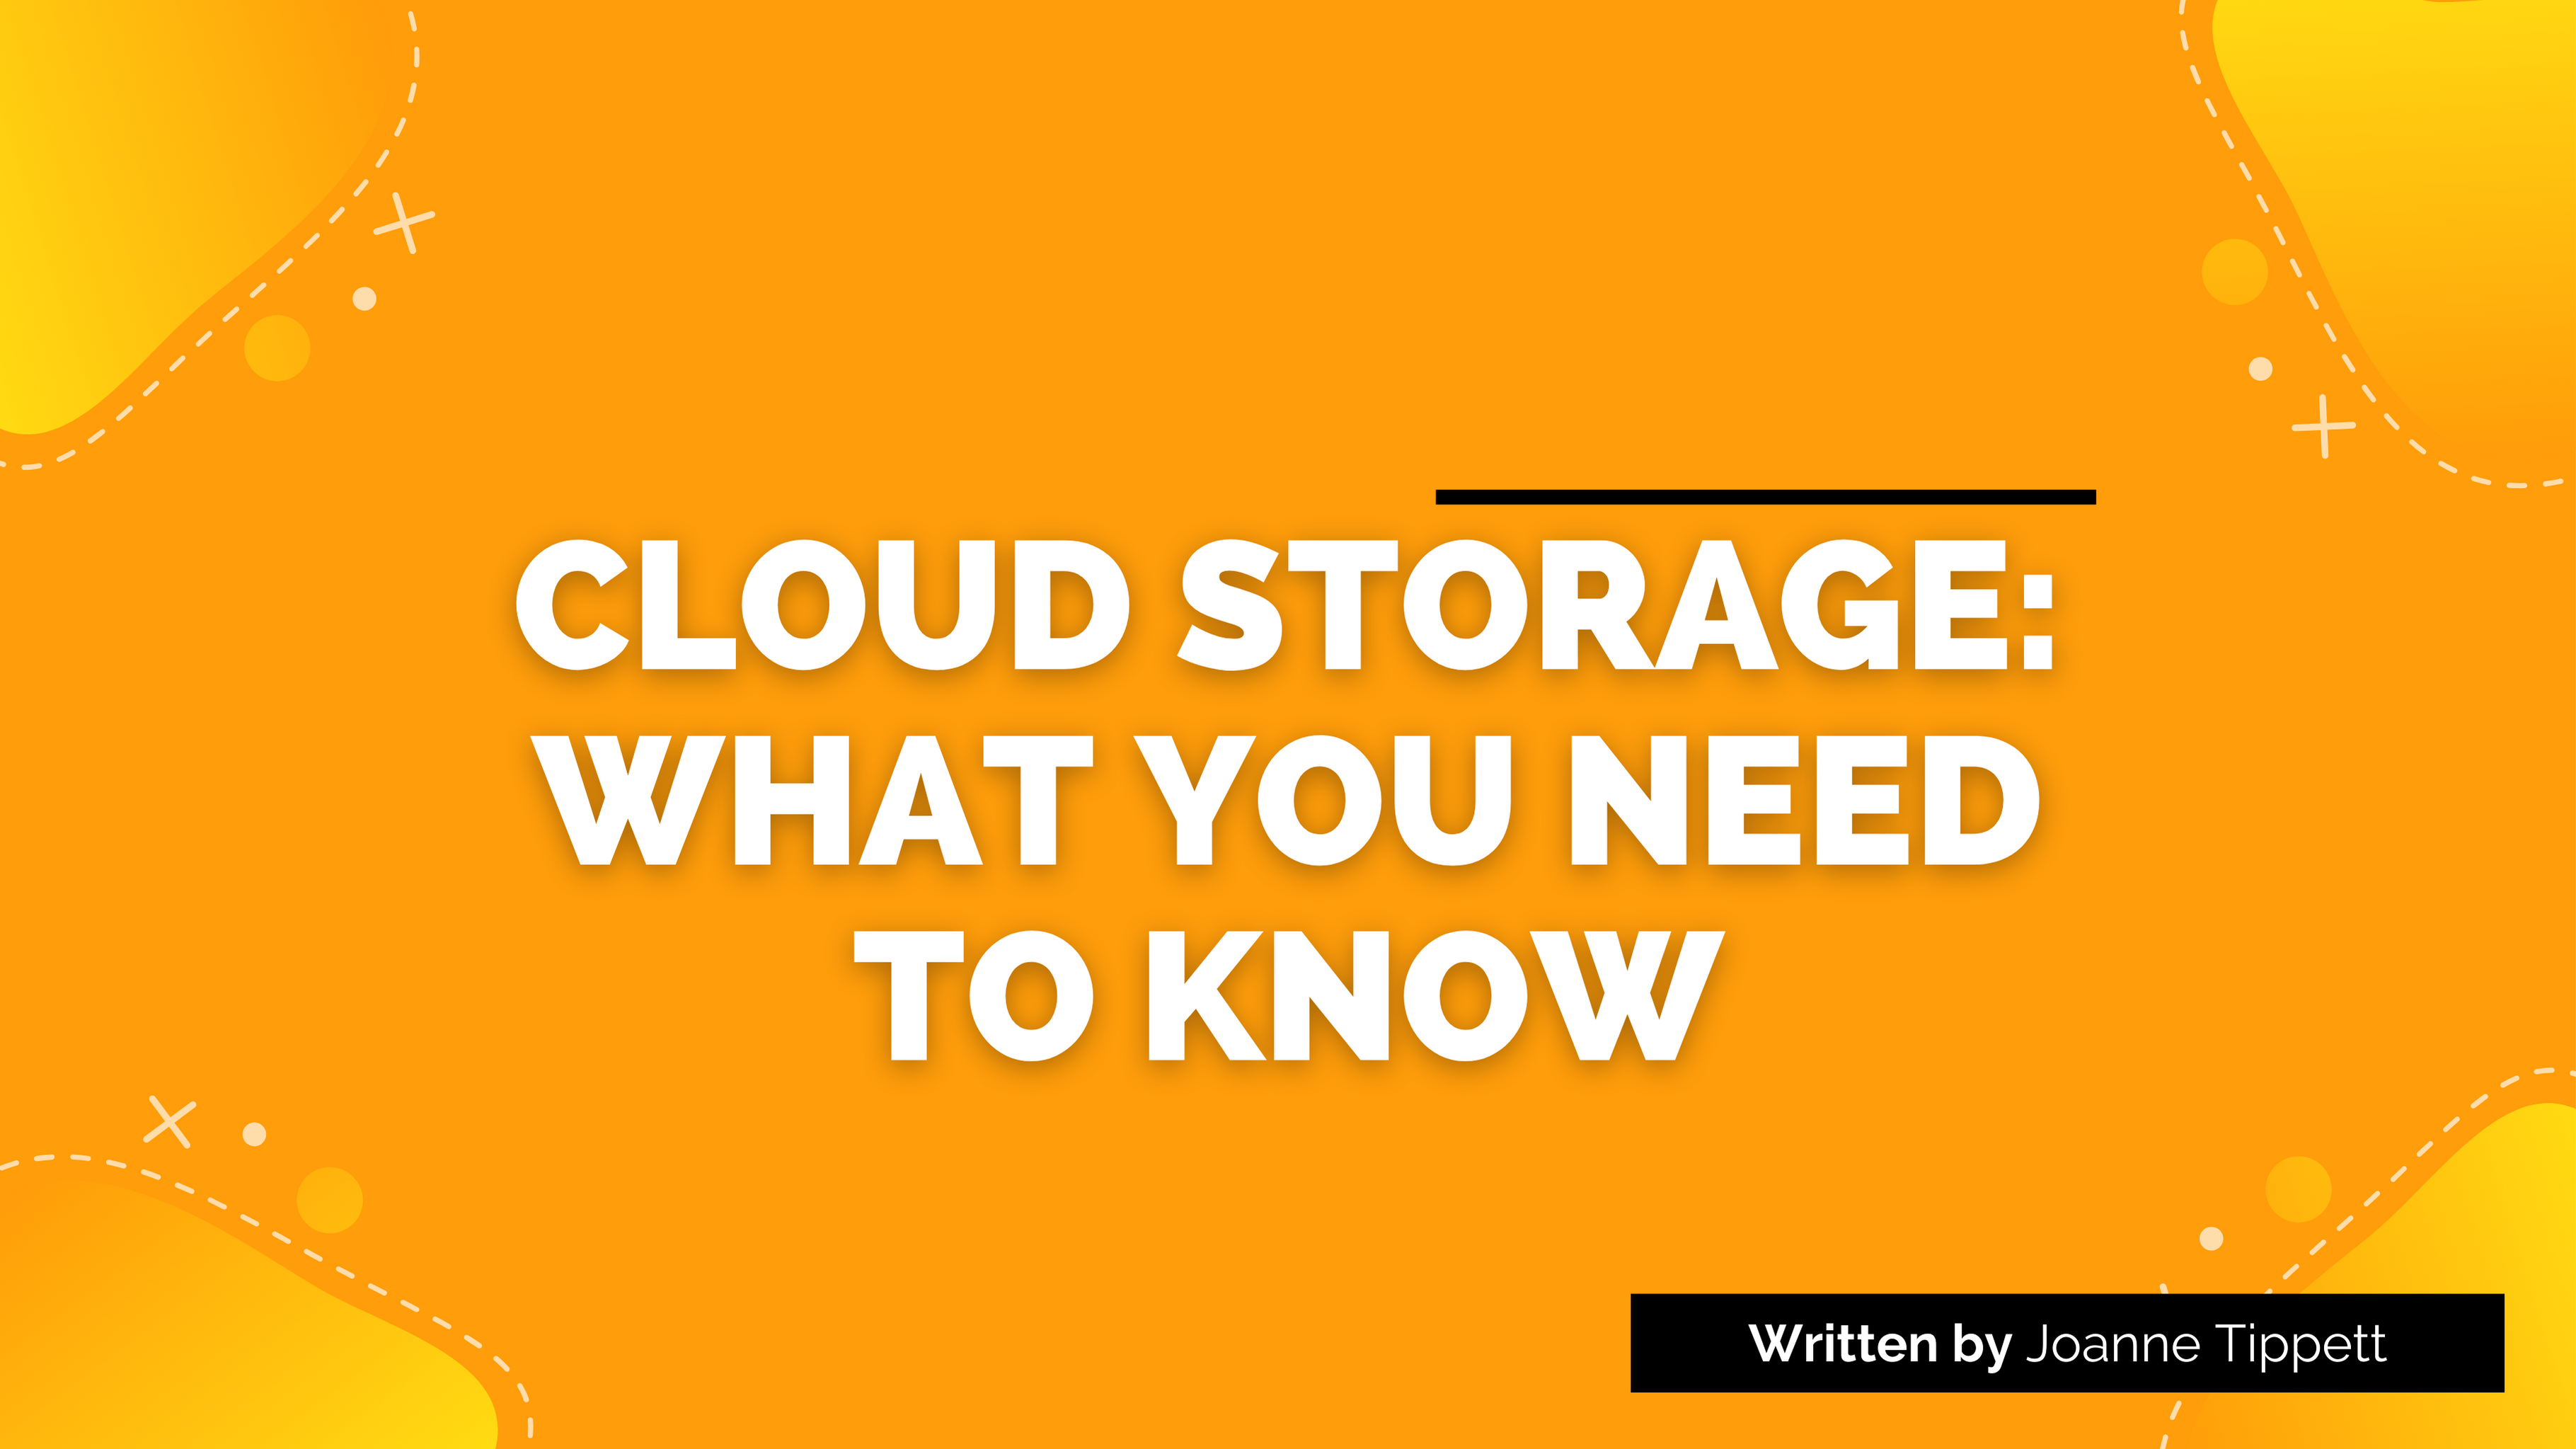 Cloud Storage: What You Need to Know